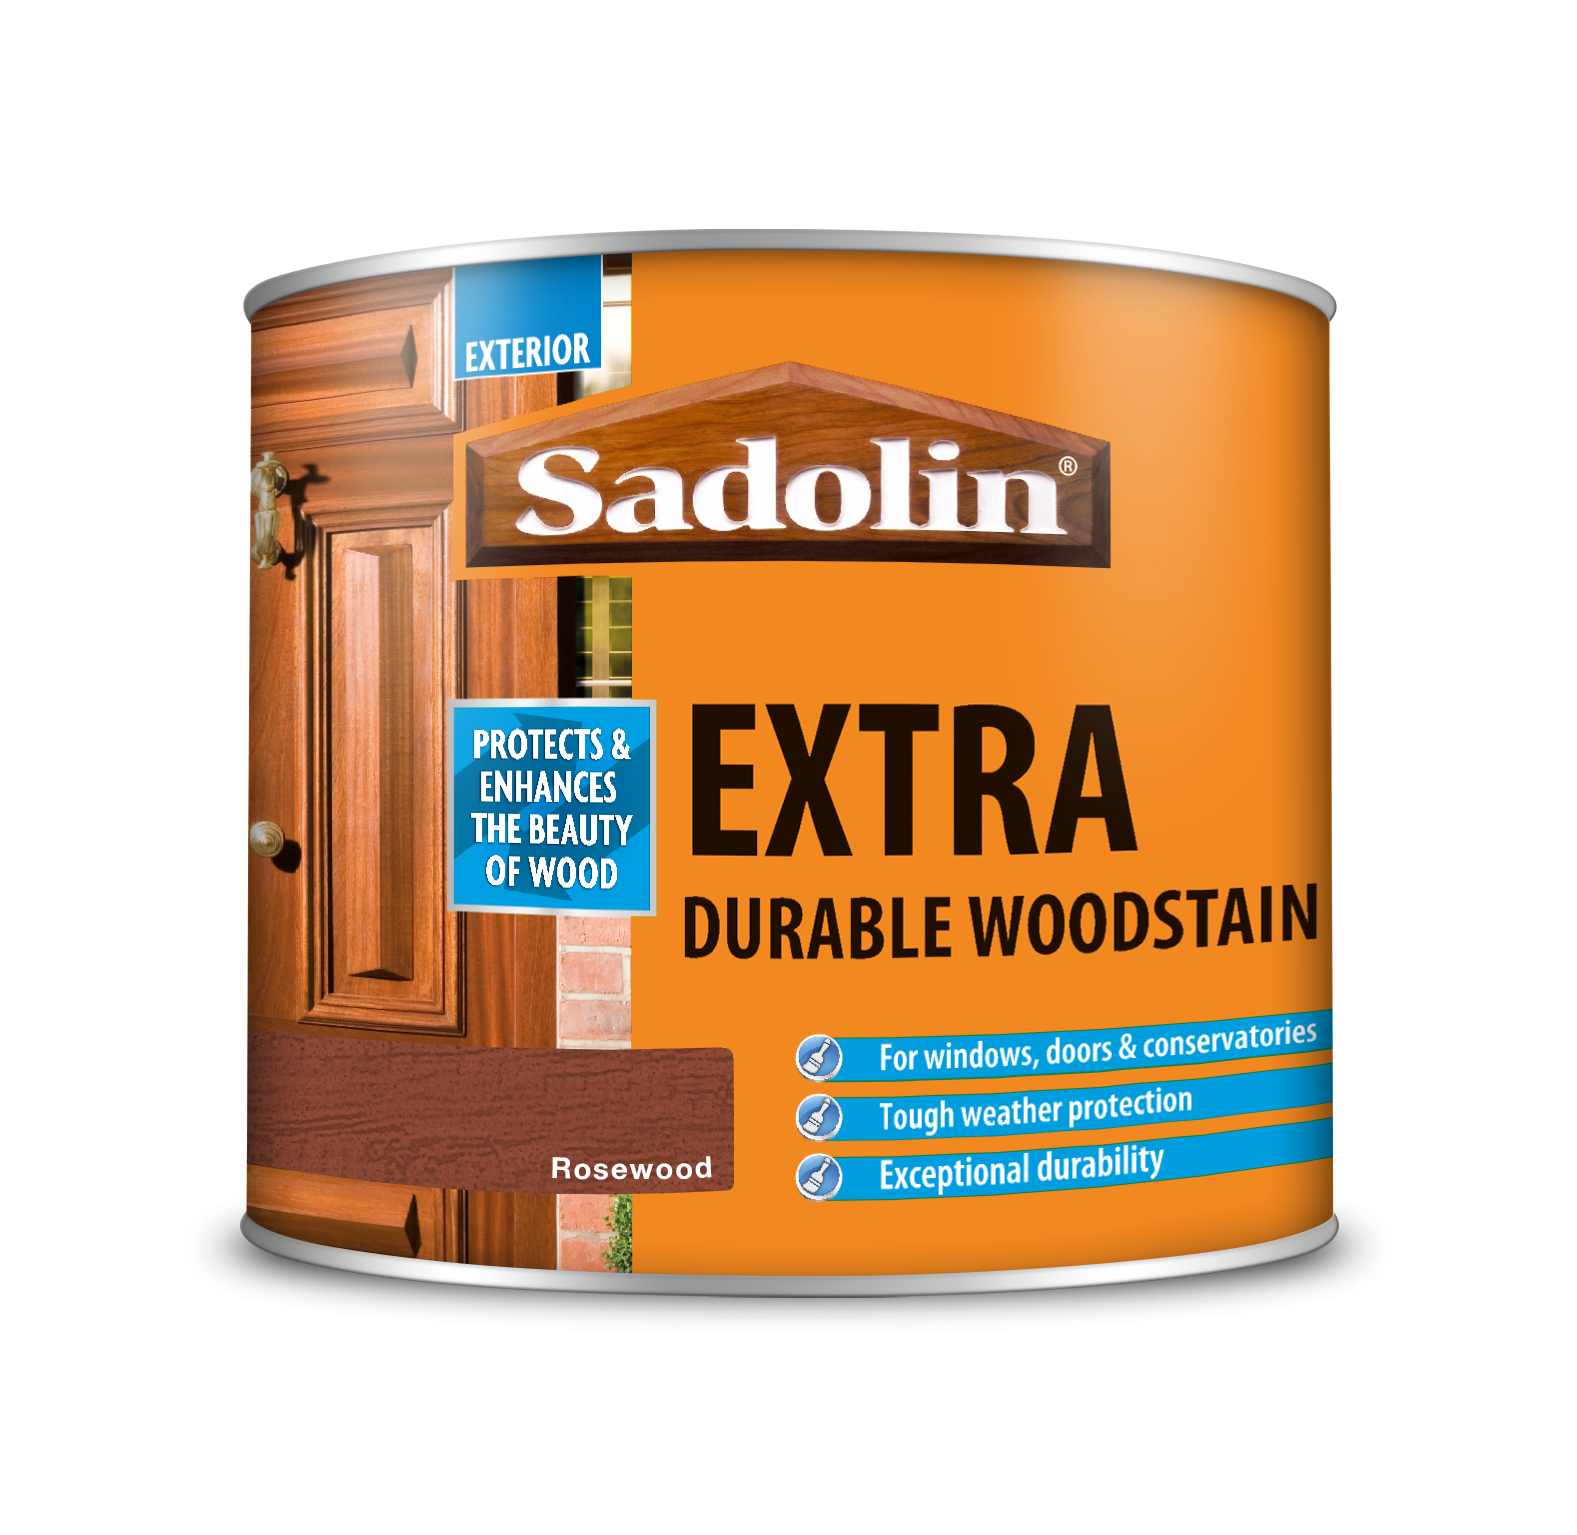 Sadolin Extra Durable Woodstain Rosewood 500ml [MPPSSUP]  5028558